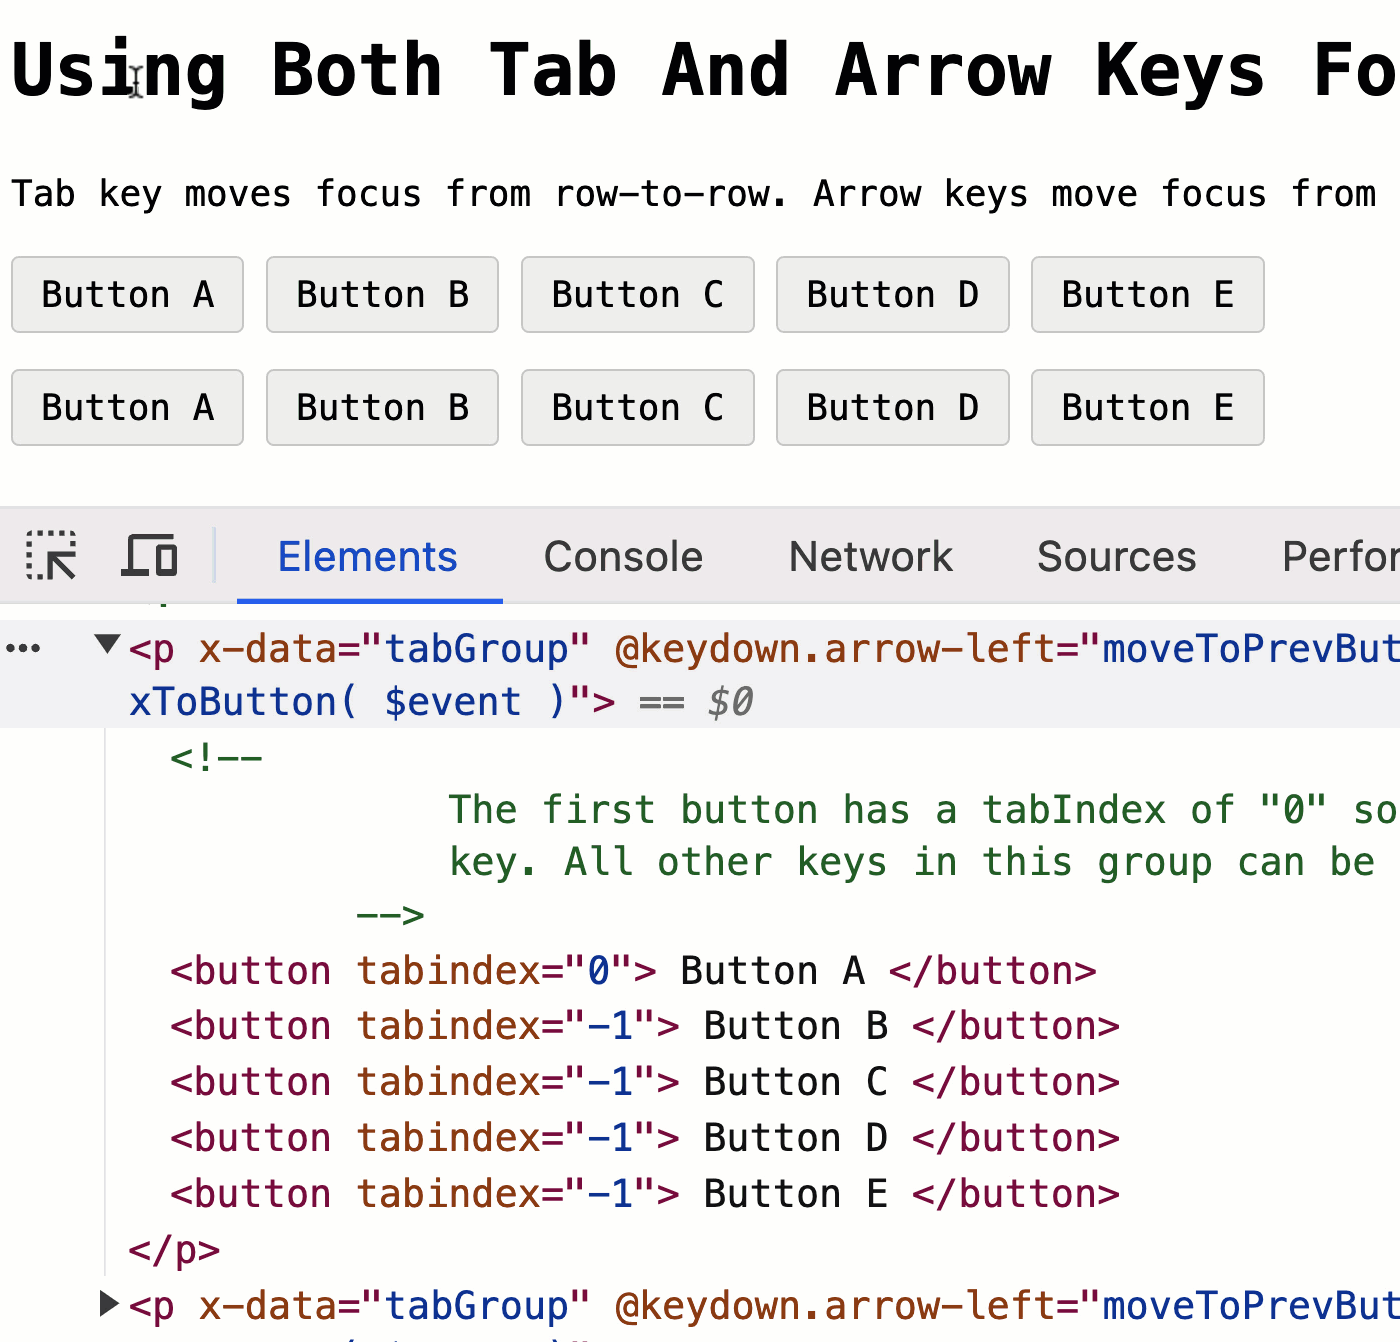 User navigating in between two button groups using Tab key; and then, using the ArrowLeft and ArrowRight keys to move from button to button within a single group.